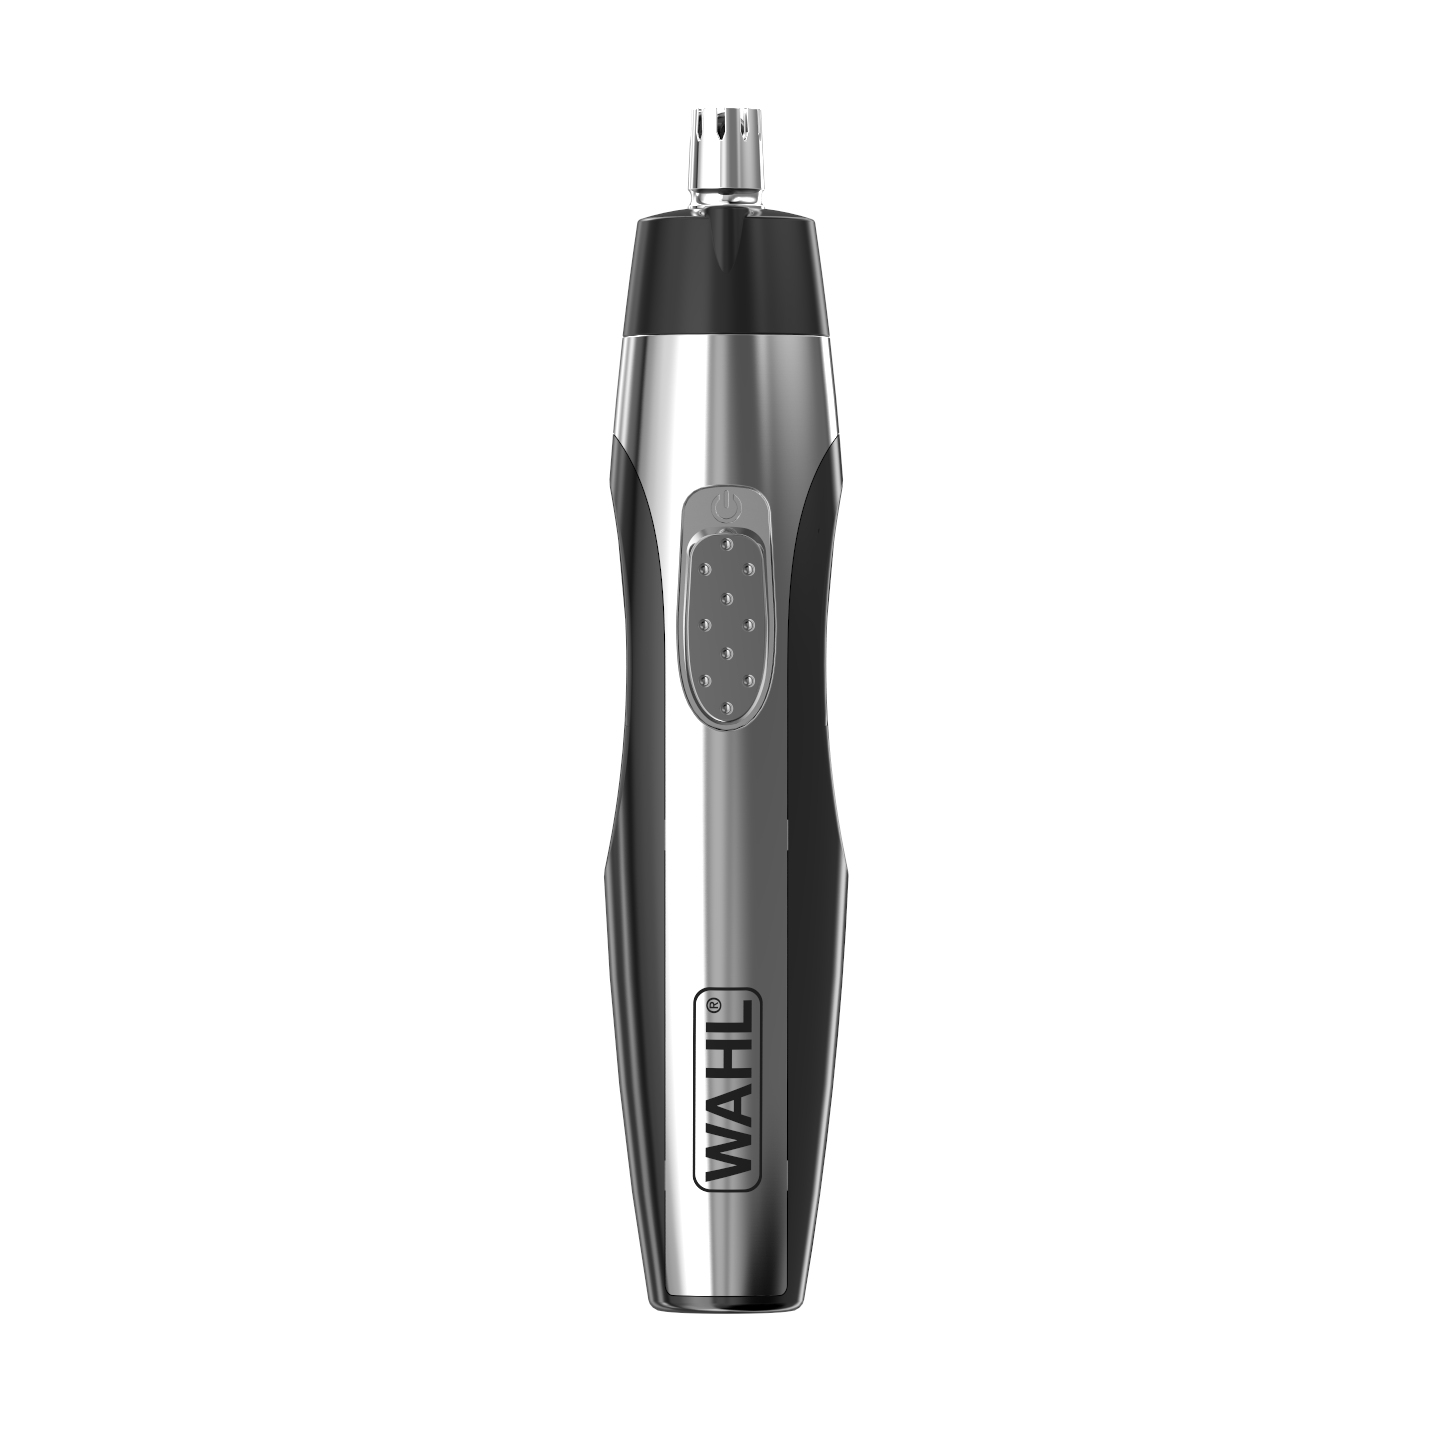 change battery in wahl nose trimmer